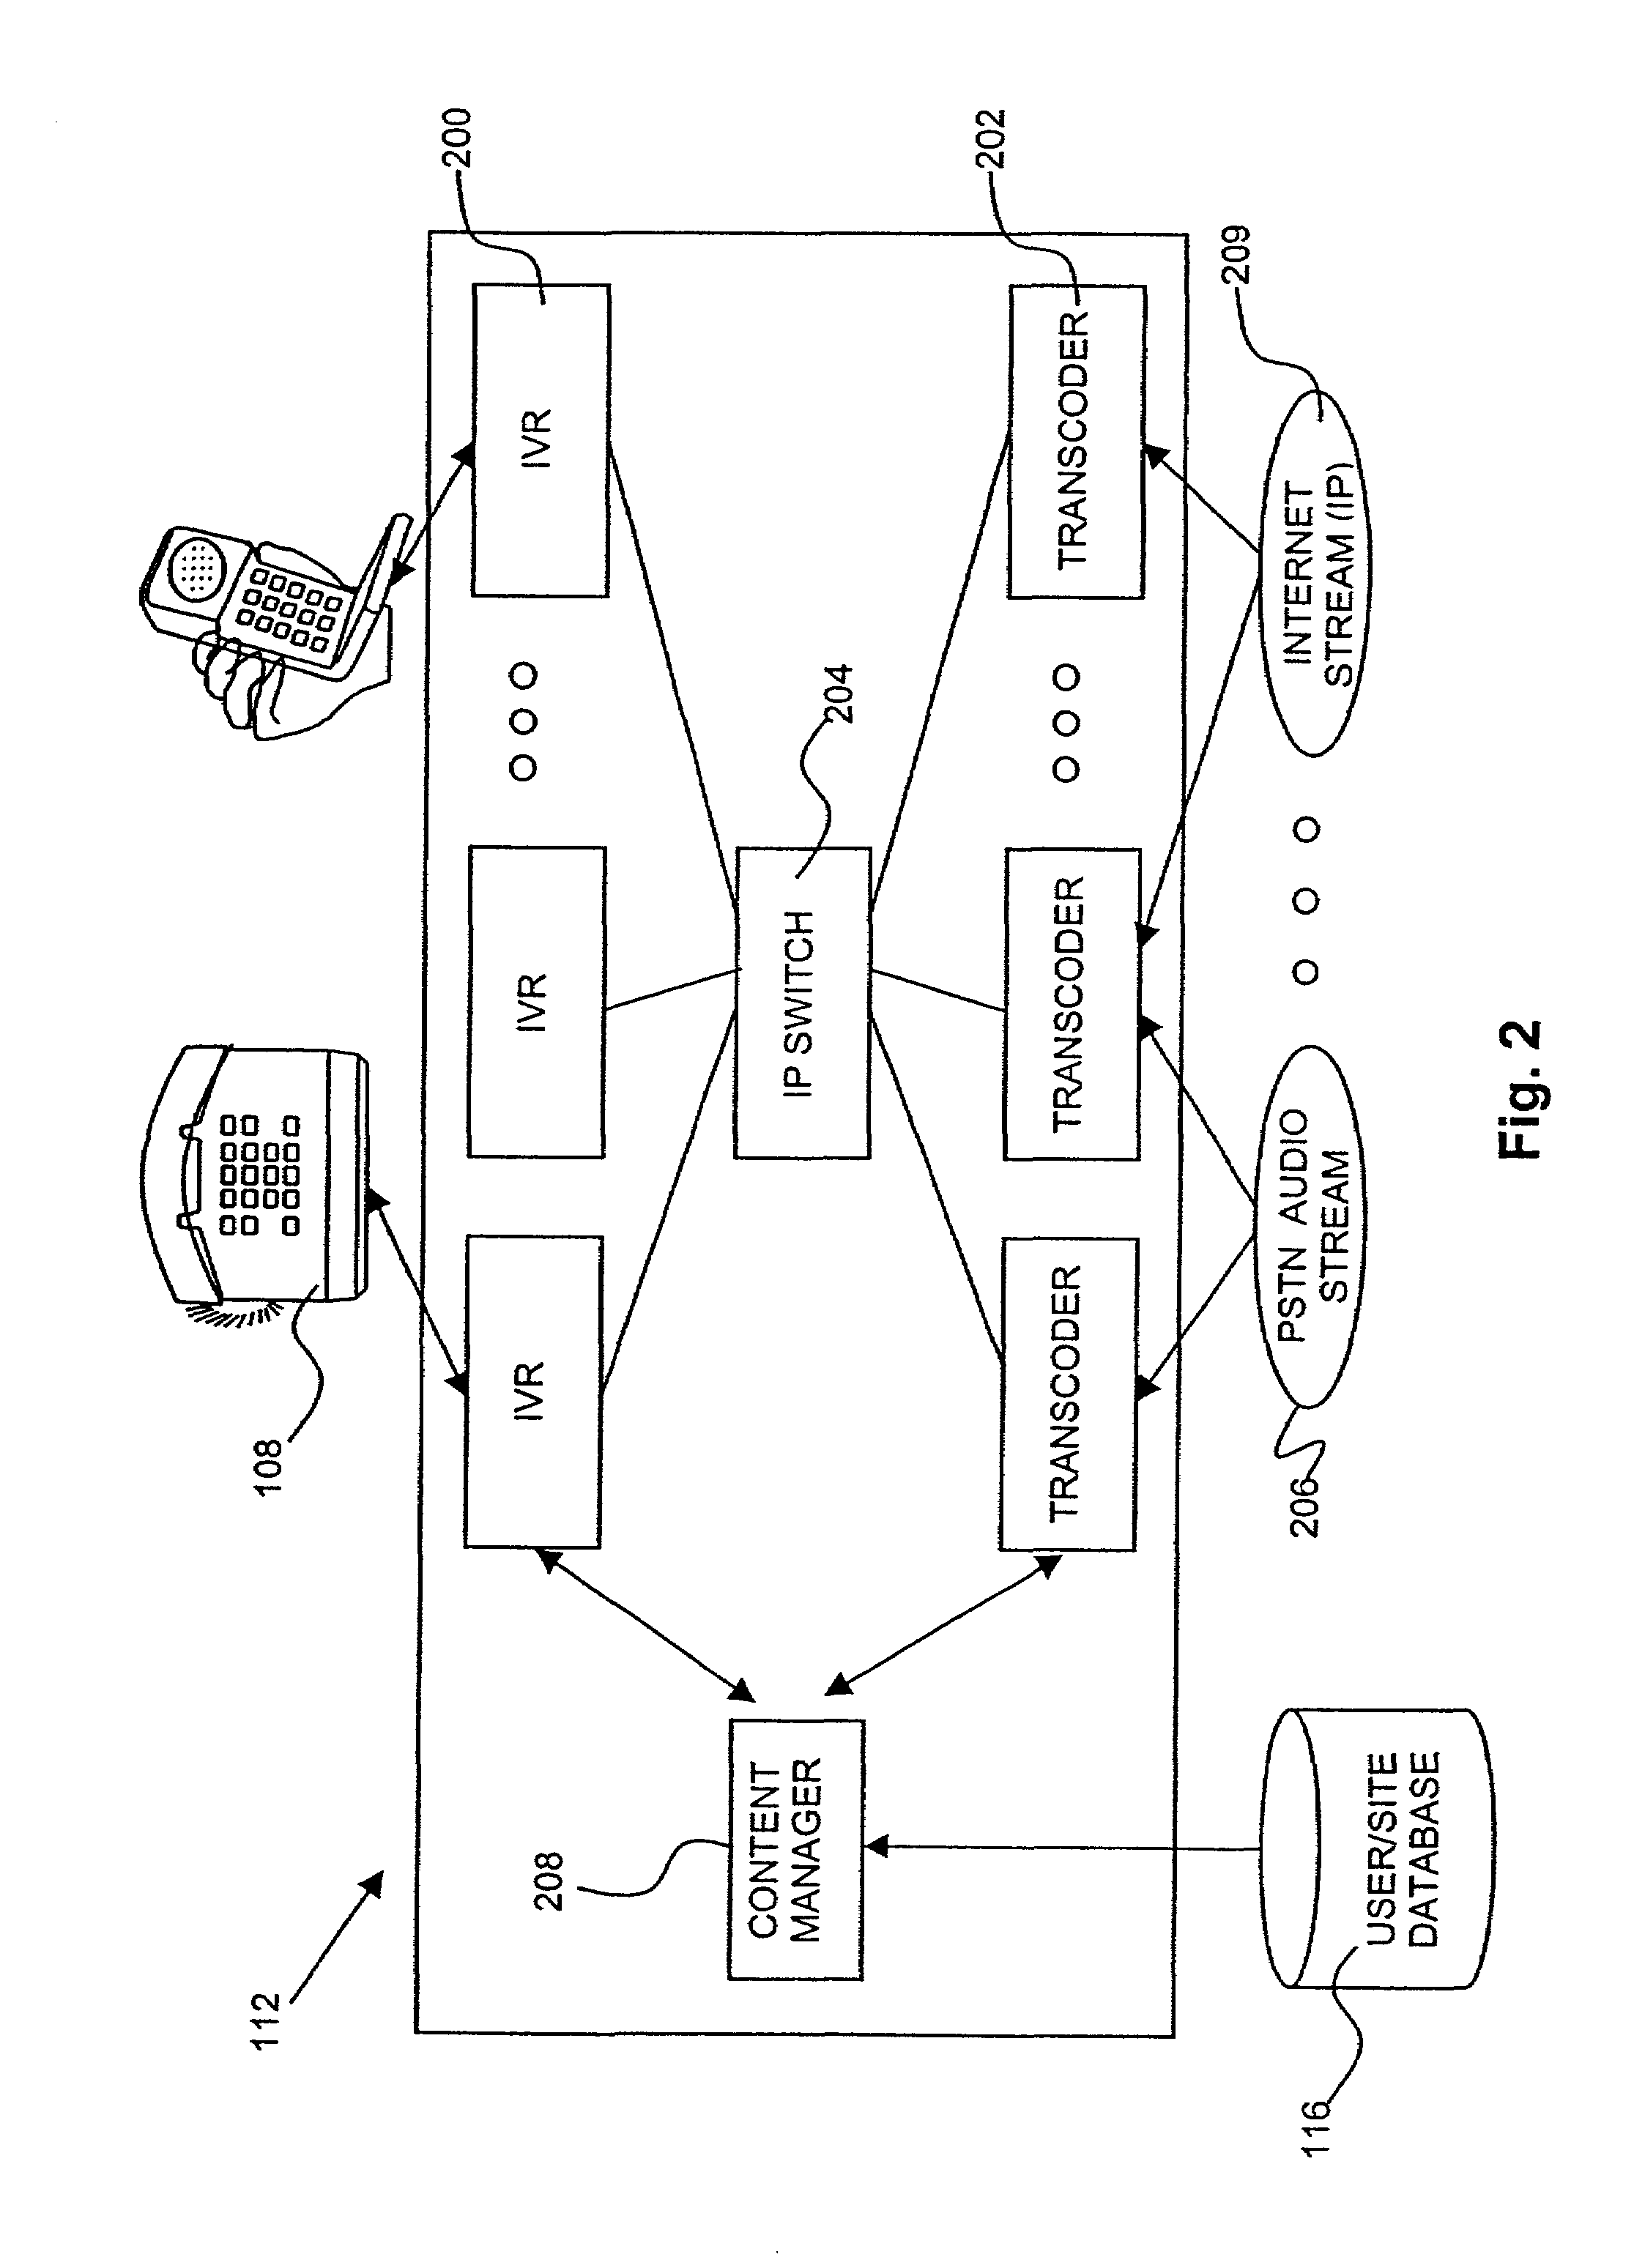 Telephone and wireless access to computer network-based audio